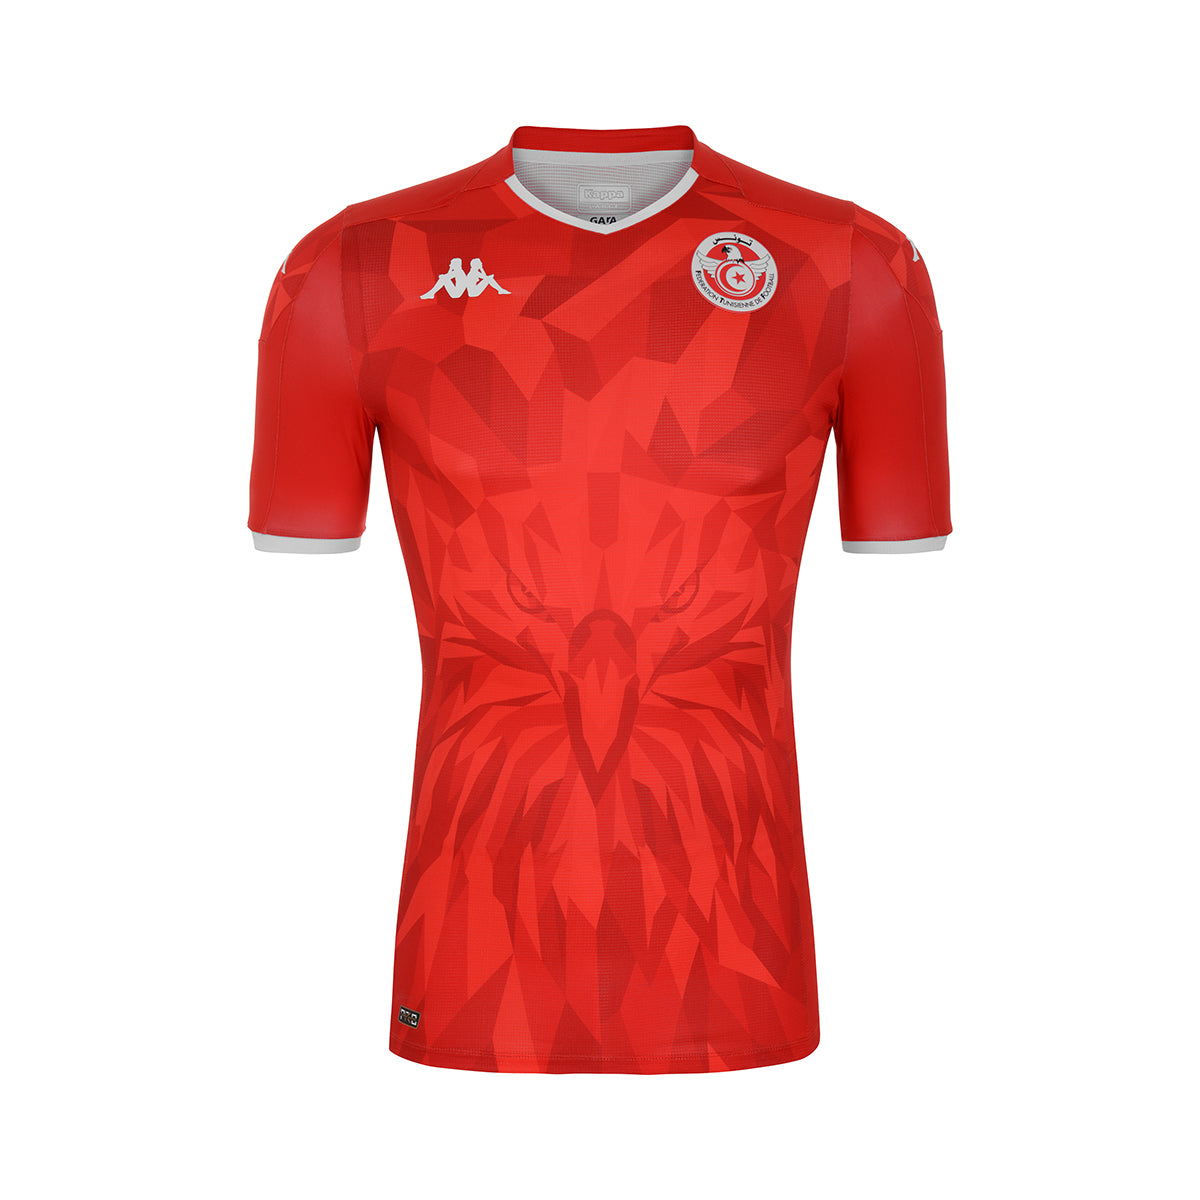 Maillot Kombat Away Tunisie 20/21 Rouge Homme - image 1